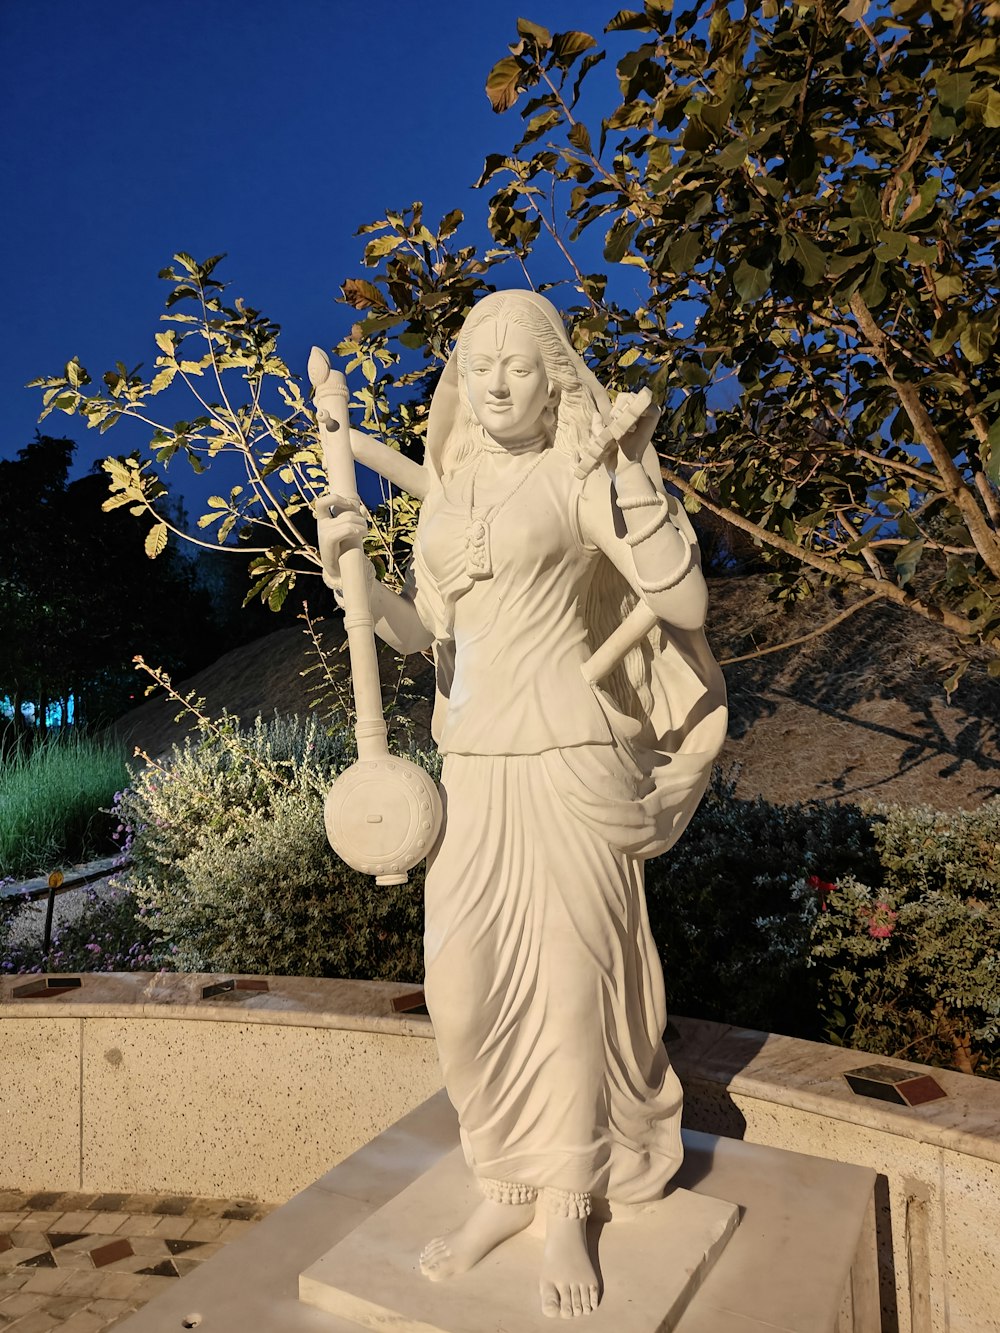 a statue of a woman holding a potted plant